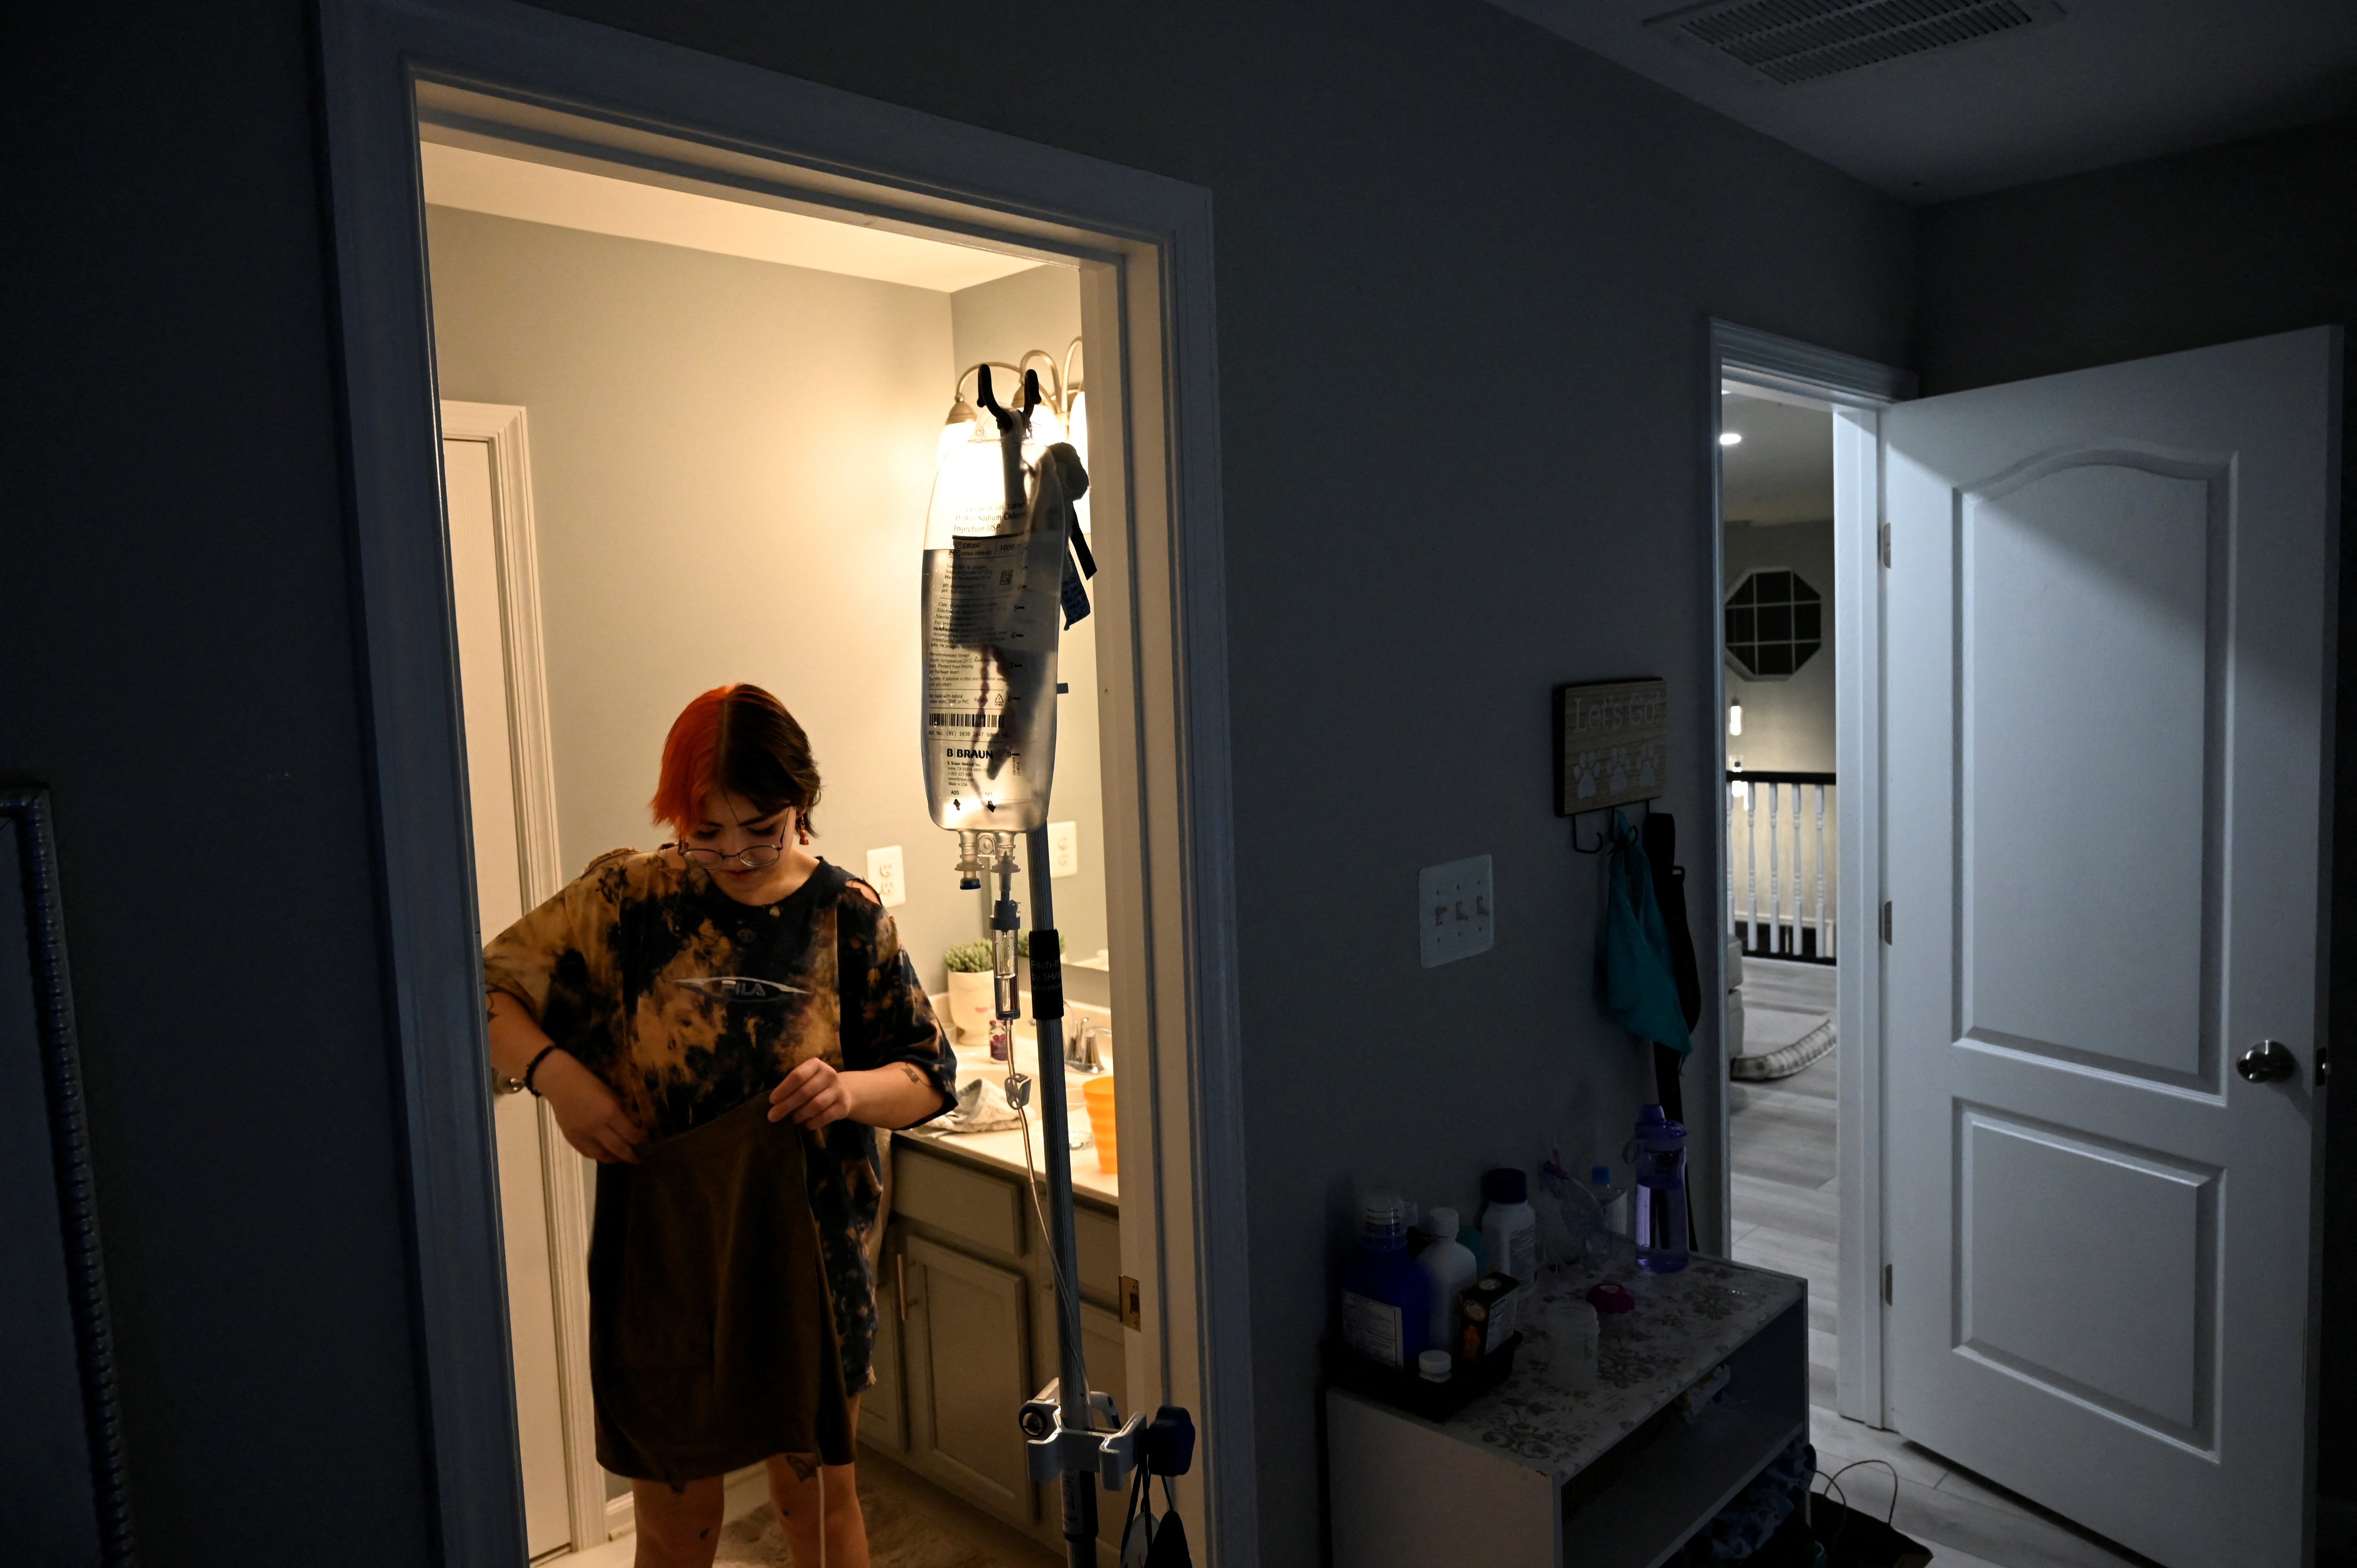 Logan tidies up their room while they carry their IV bag